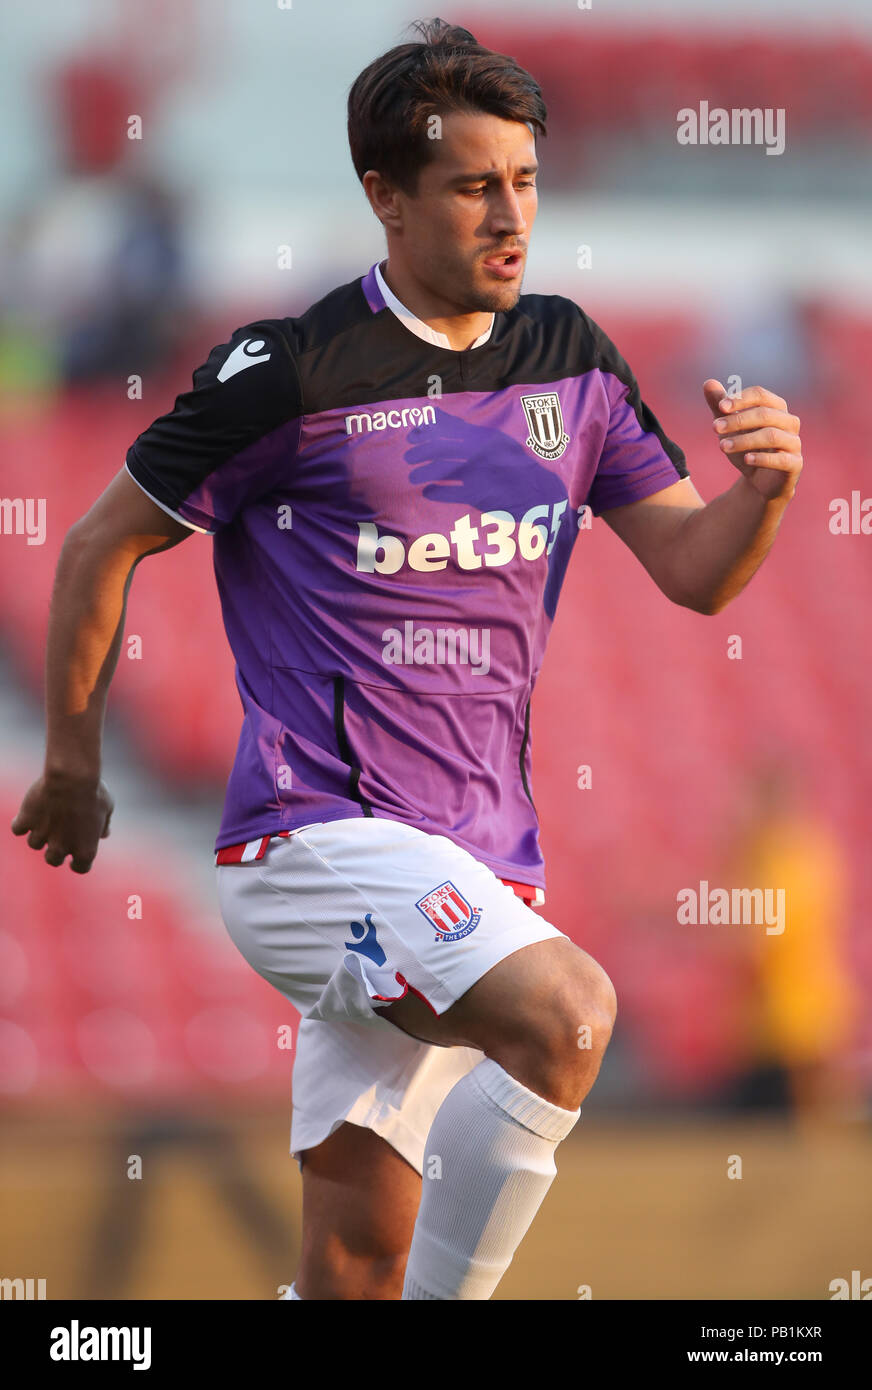 Stoke City's Bojan Krkic during a pre season friendly match at The Bet365 Stadium, Stoke. PRESS ASSOCIATION Photo. Picture date: Wednesday July 25, 2018. Photo credit should read: Nick Potts/PA Wire. EDITORIAL USE ONLY No use with unauthorised audio, video, data, fixture lists, club/league logos or "live" services. Online in-match use limited to 75 images, no video emulation. No use in betting, games or single club/league/player publications. Stock Photo